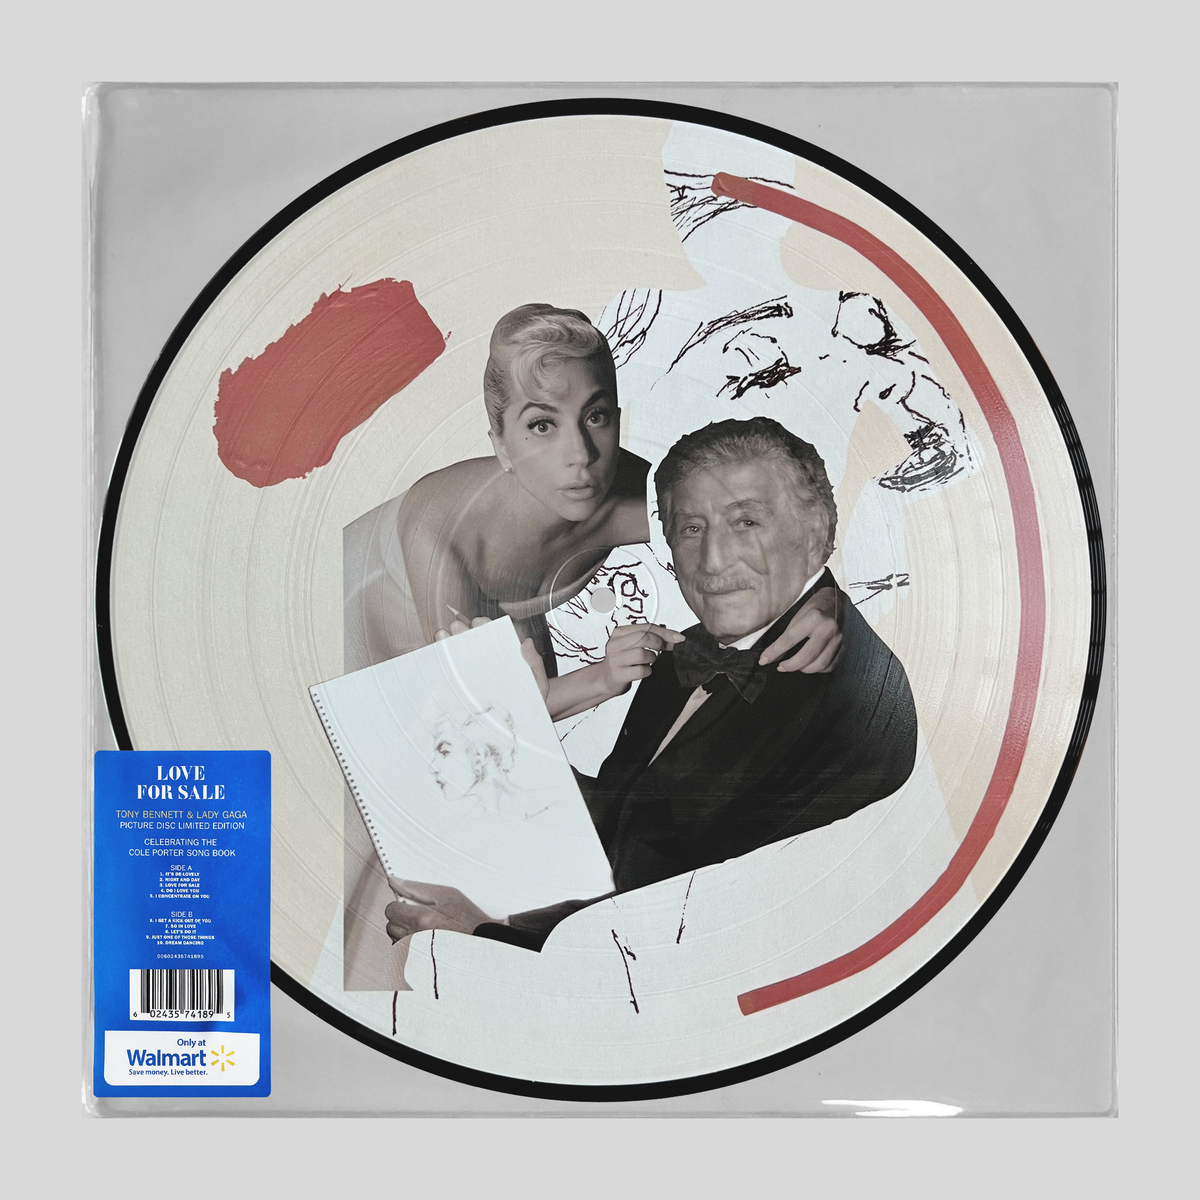 Love For Sale (Walmart Exclusive) [12" Picture Disc]